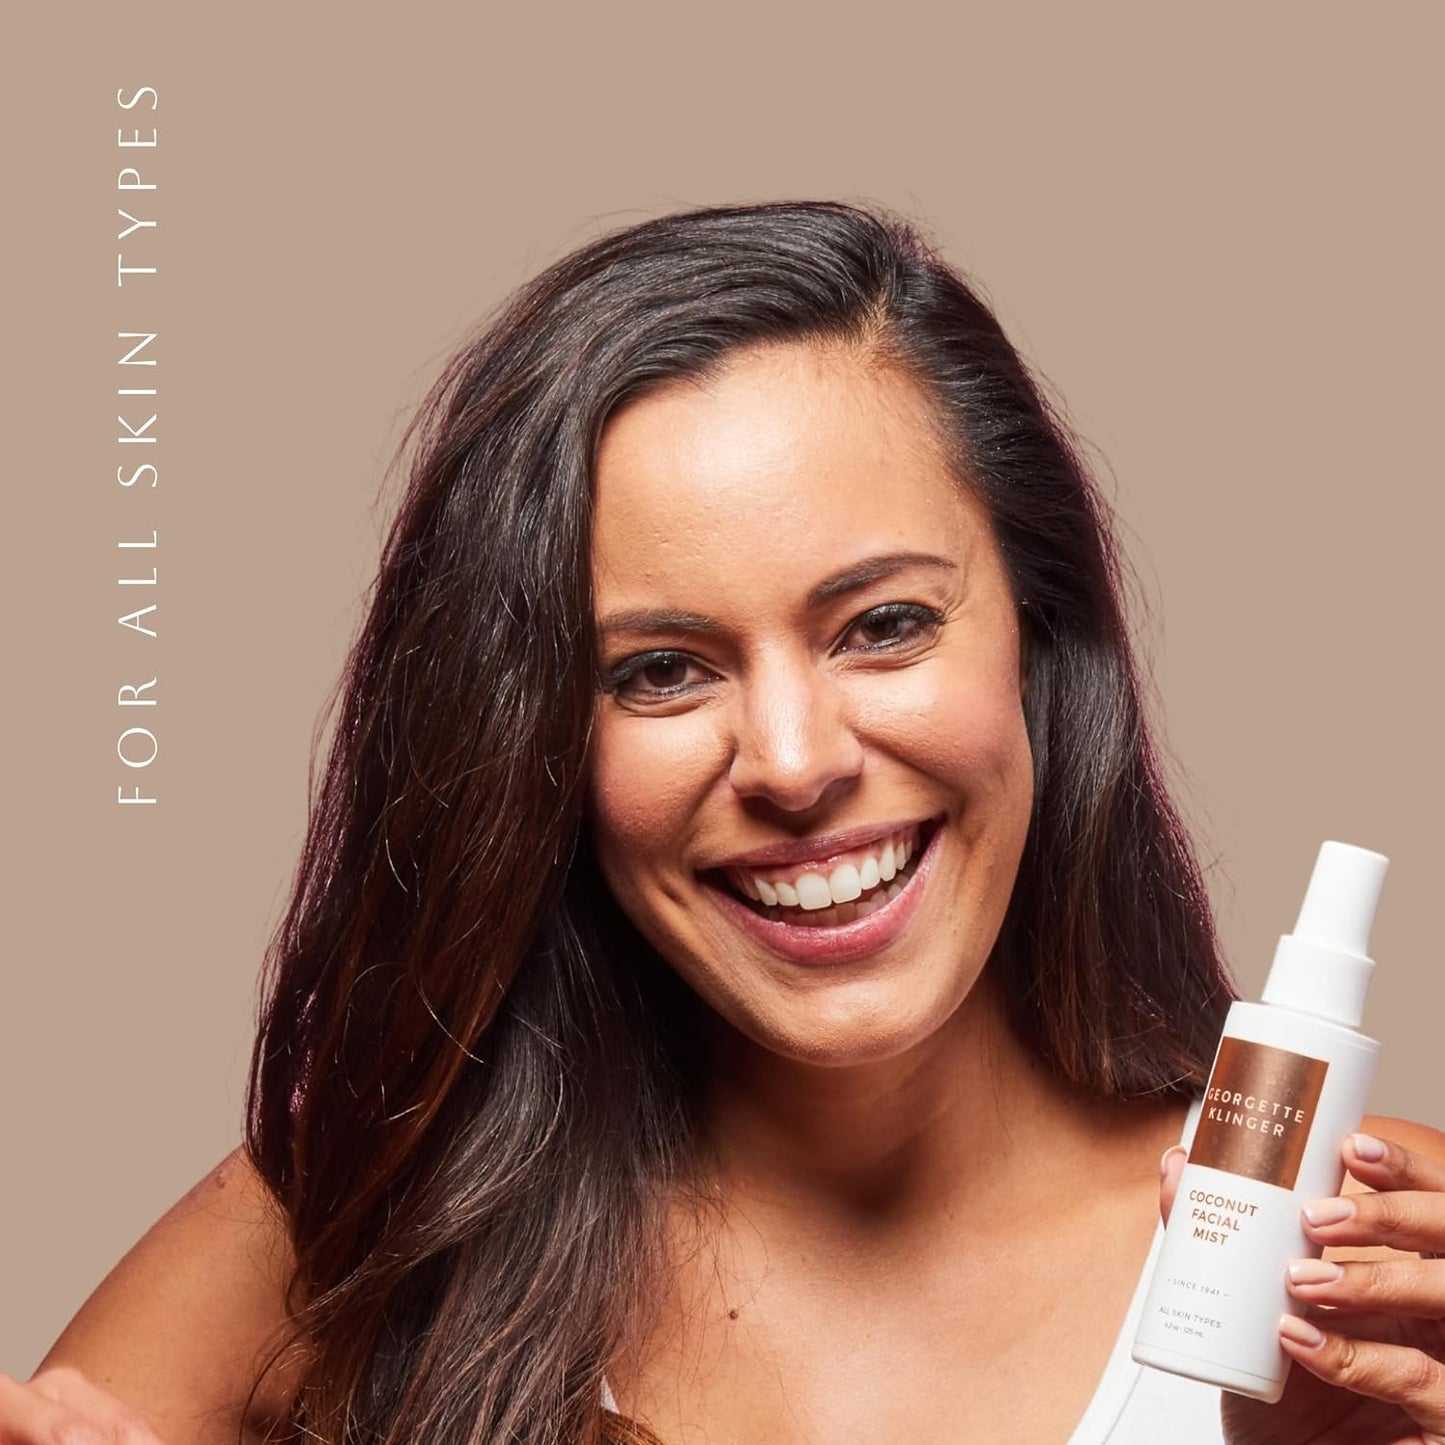 "Revitalize and Refresh with Our Coconut Facial Mist - the Ultimate Hydrating Makeup Setting Spray for a Dewy Matte Face, Infused with Moisturizing Antioxidants to Protect and Plump Dehydrated Skin - 4.2 Oz"